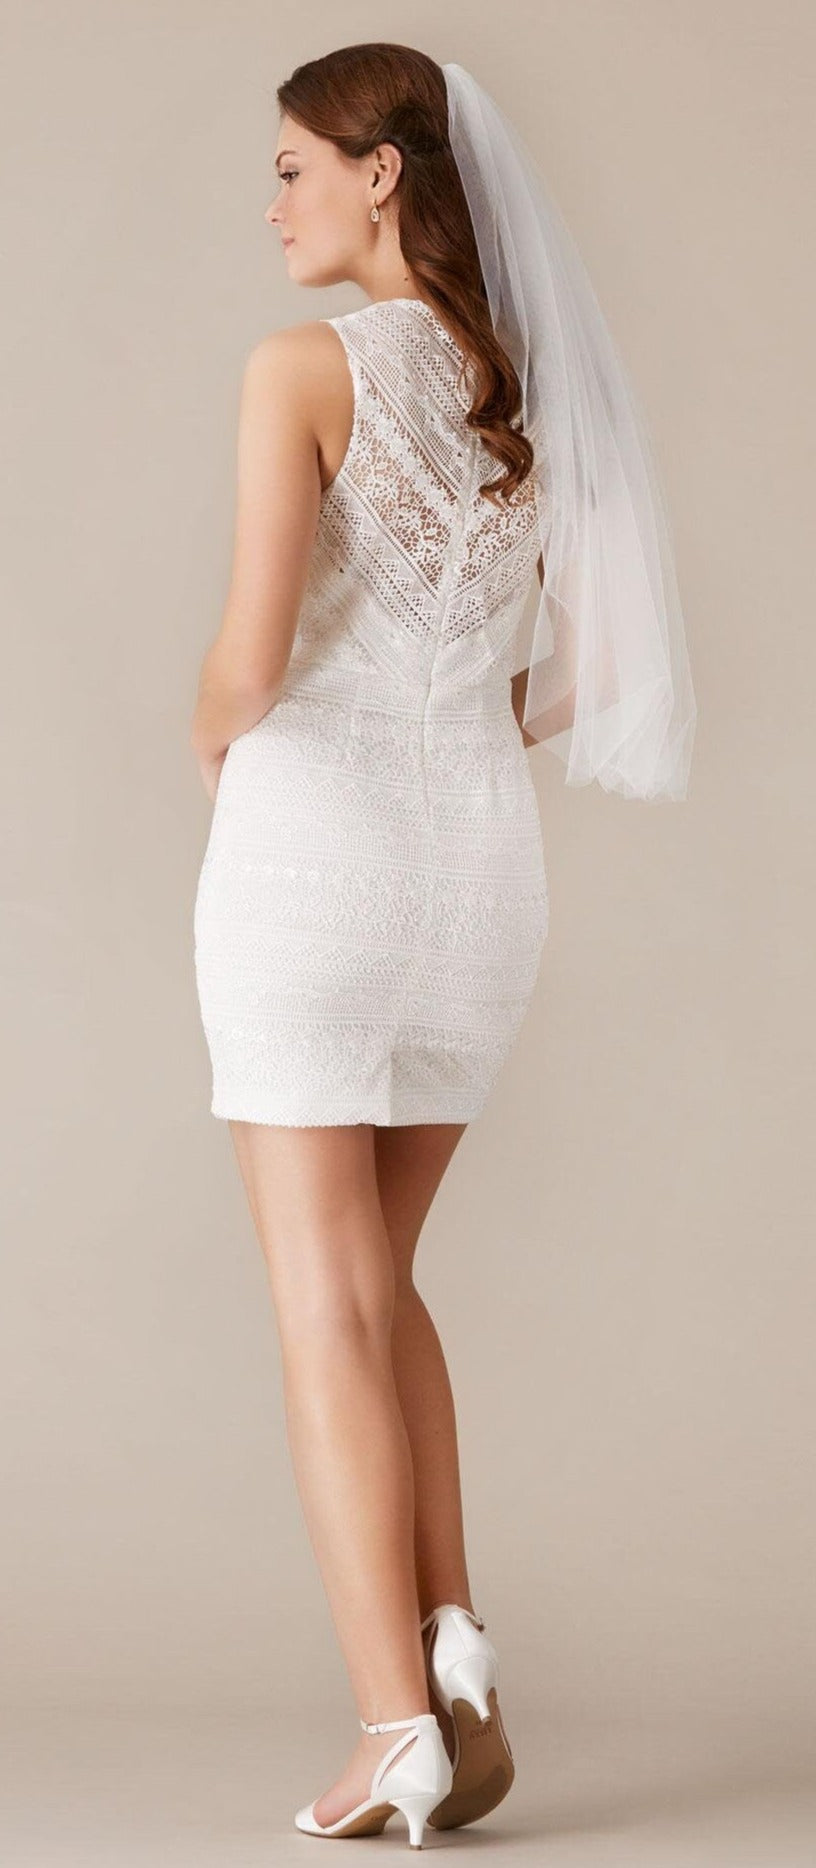 Fitted Pencil Skirt Short Above the Knee Midi Sleeveless Wedding Dress Bridal Gown All Over Lace Midi Sample